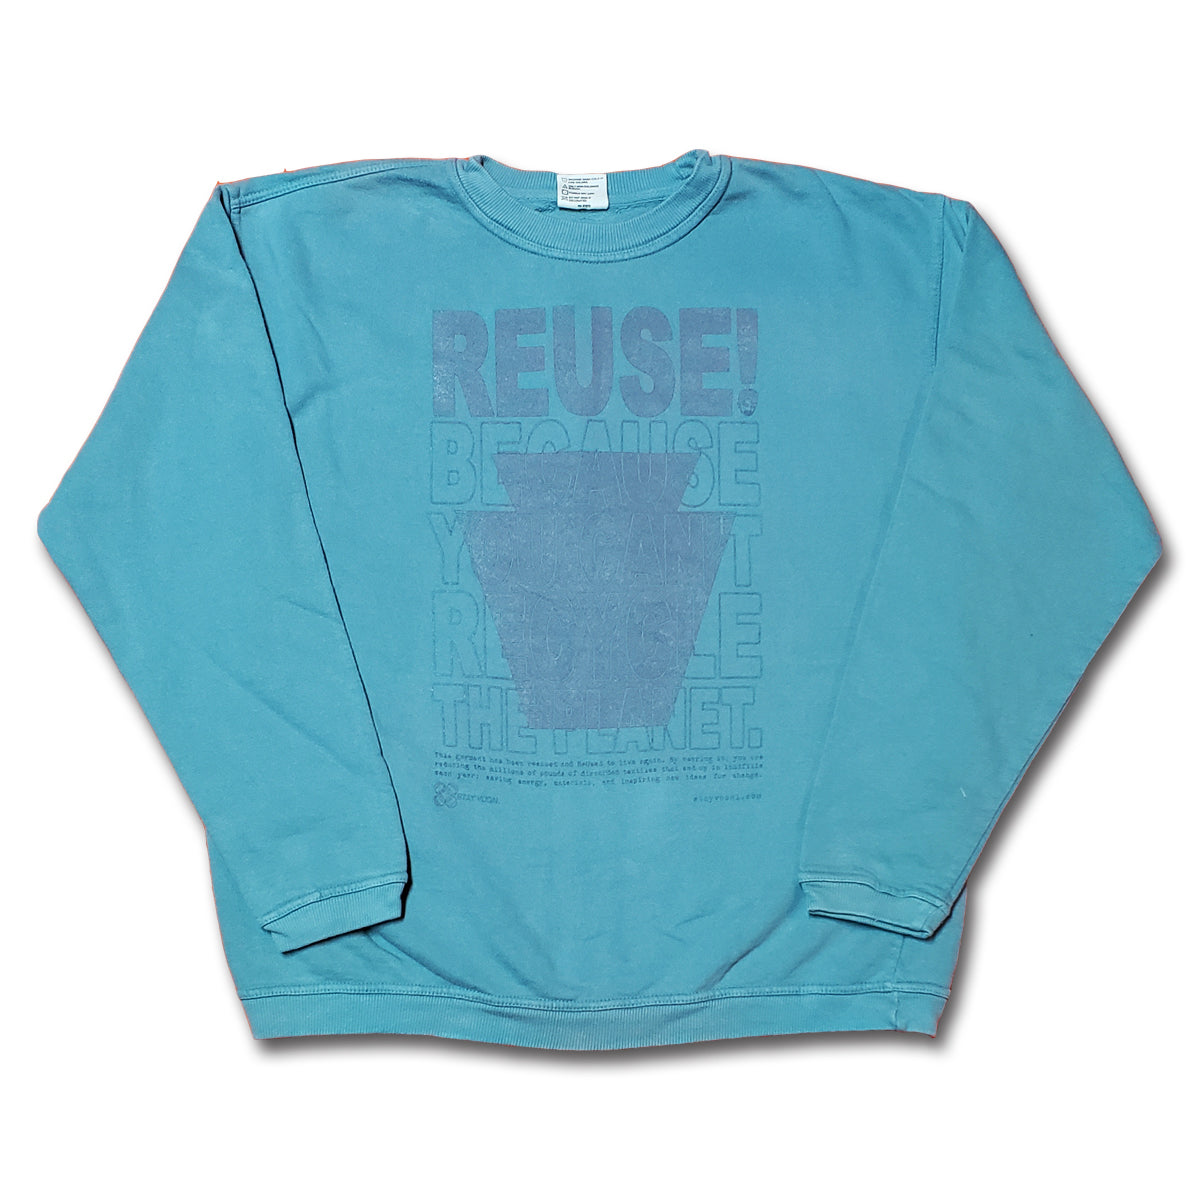 REUSE! Because You Can't Recycle The Planet. Pennsylvania Crewneck Sweatshirt